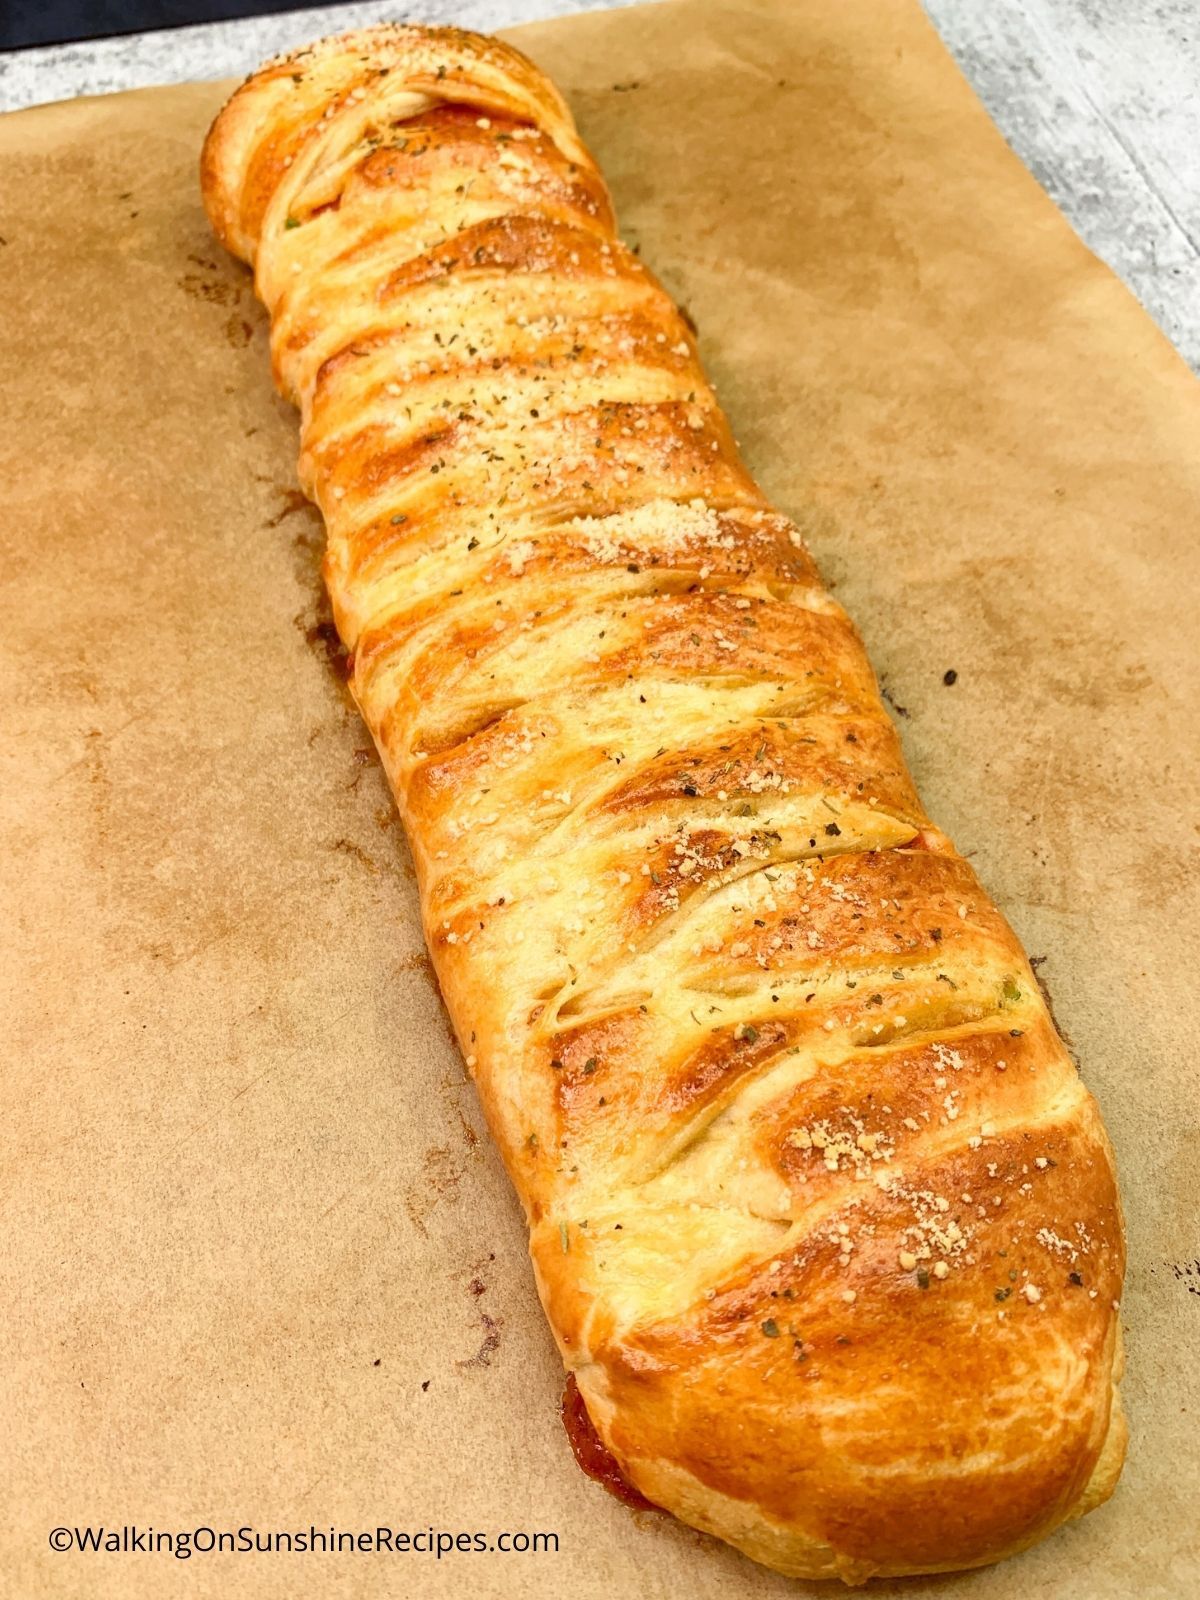 braided pizza with refrigerator pizza dough baked on parchment paper.